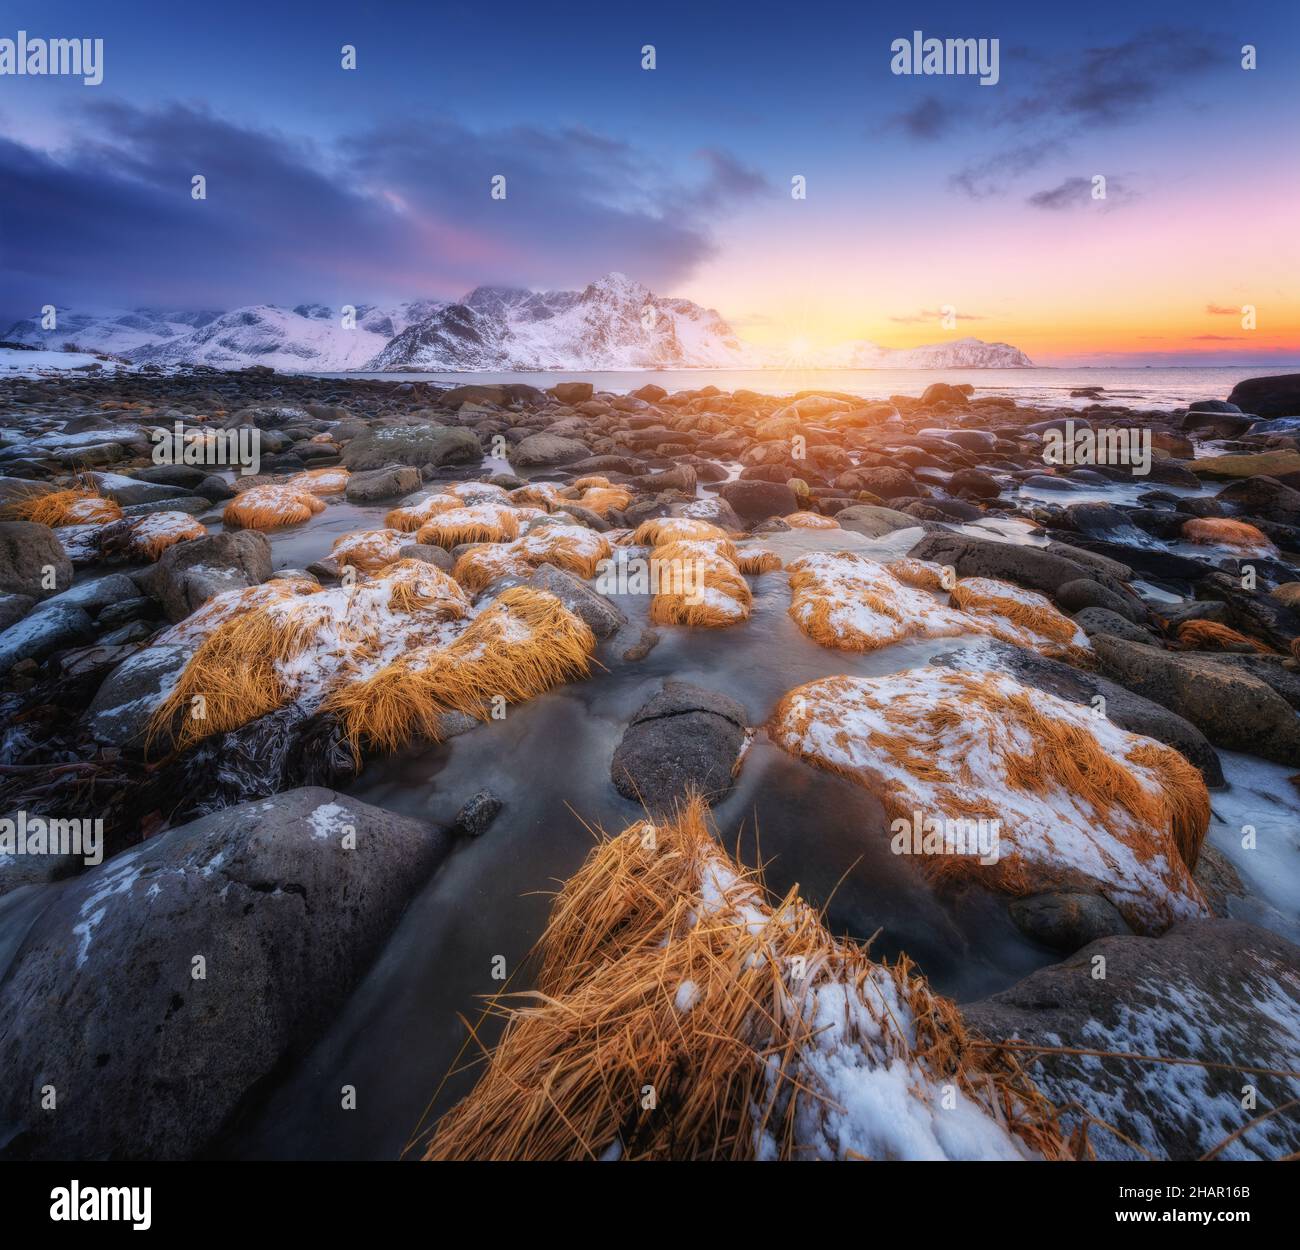 Stones with yellow grass in ice on the beach, snowy mountains Stock Photo